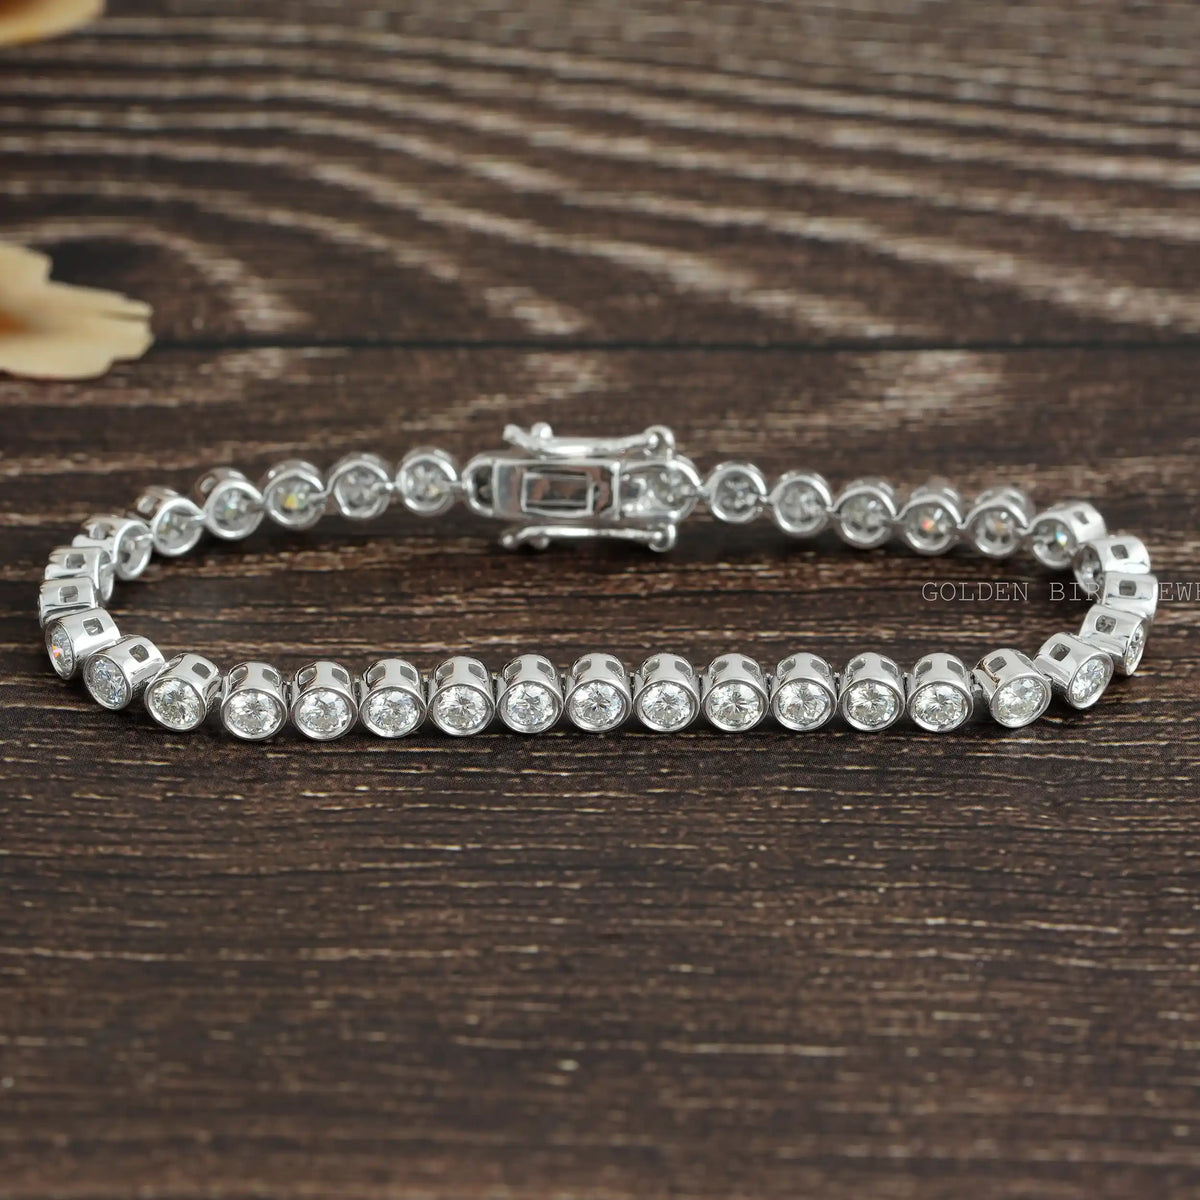 [Front view of round cut moissanite tennis bracelet made of white gold]-[Golden Bird Jewels]